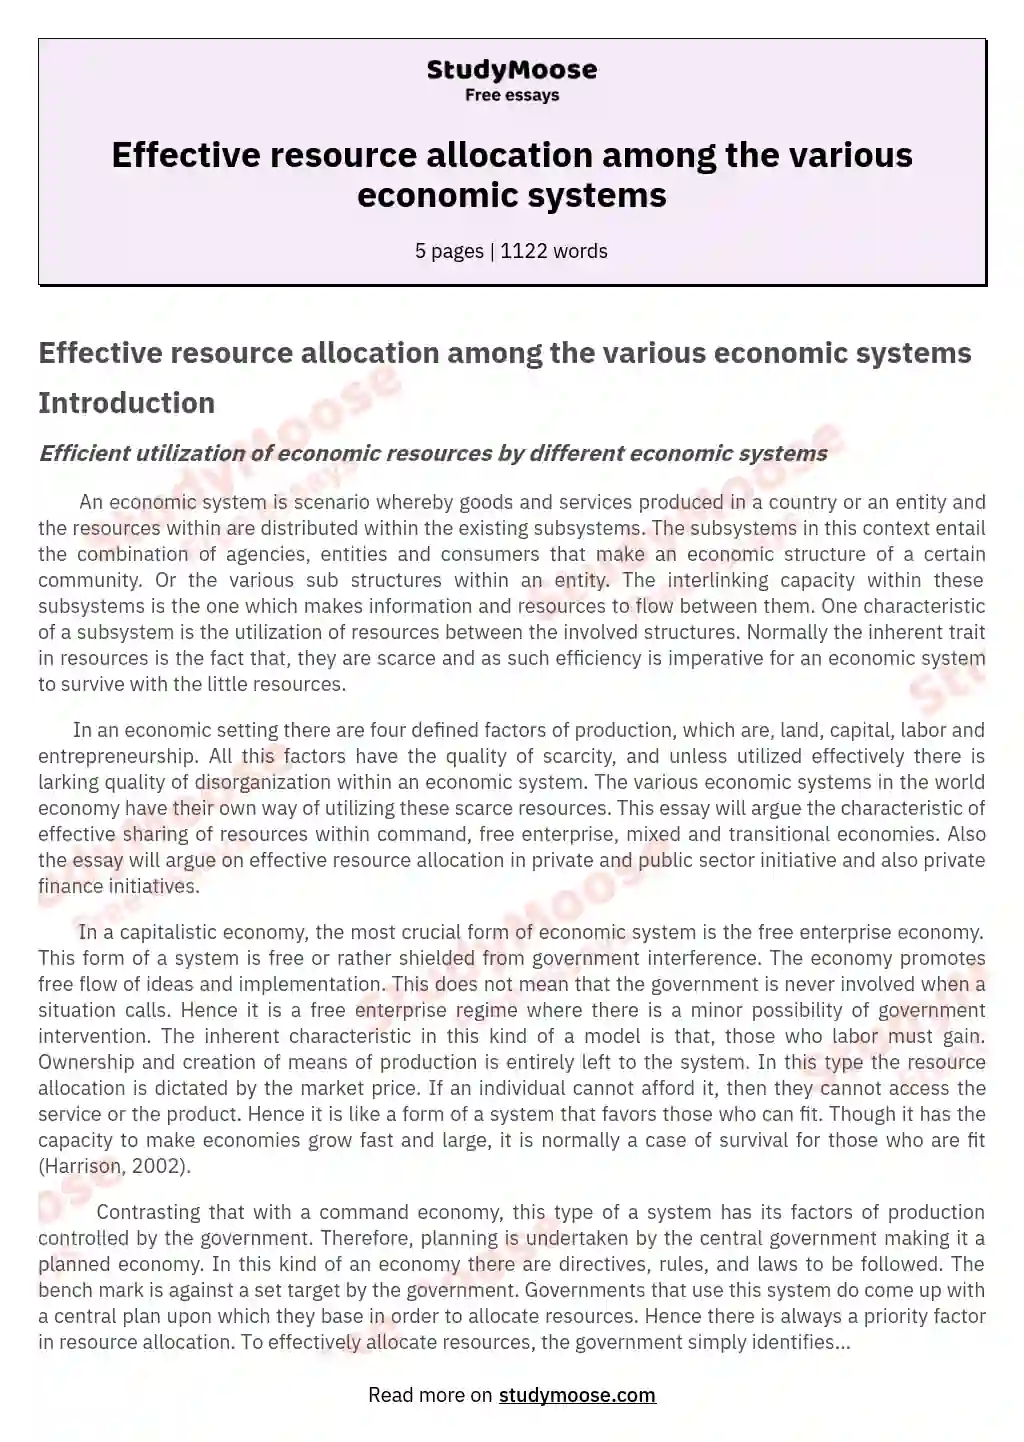 Effective resource allocation among the various economic systems essay